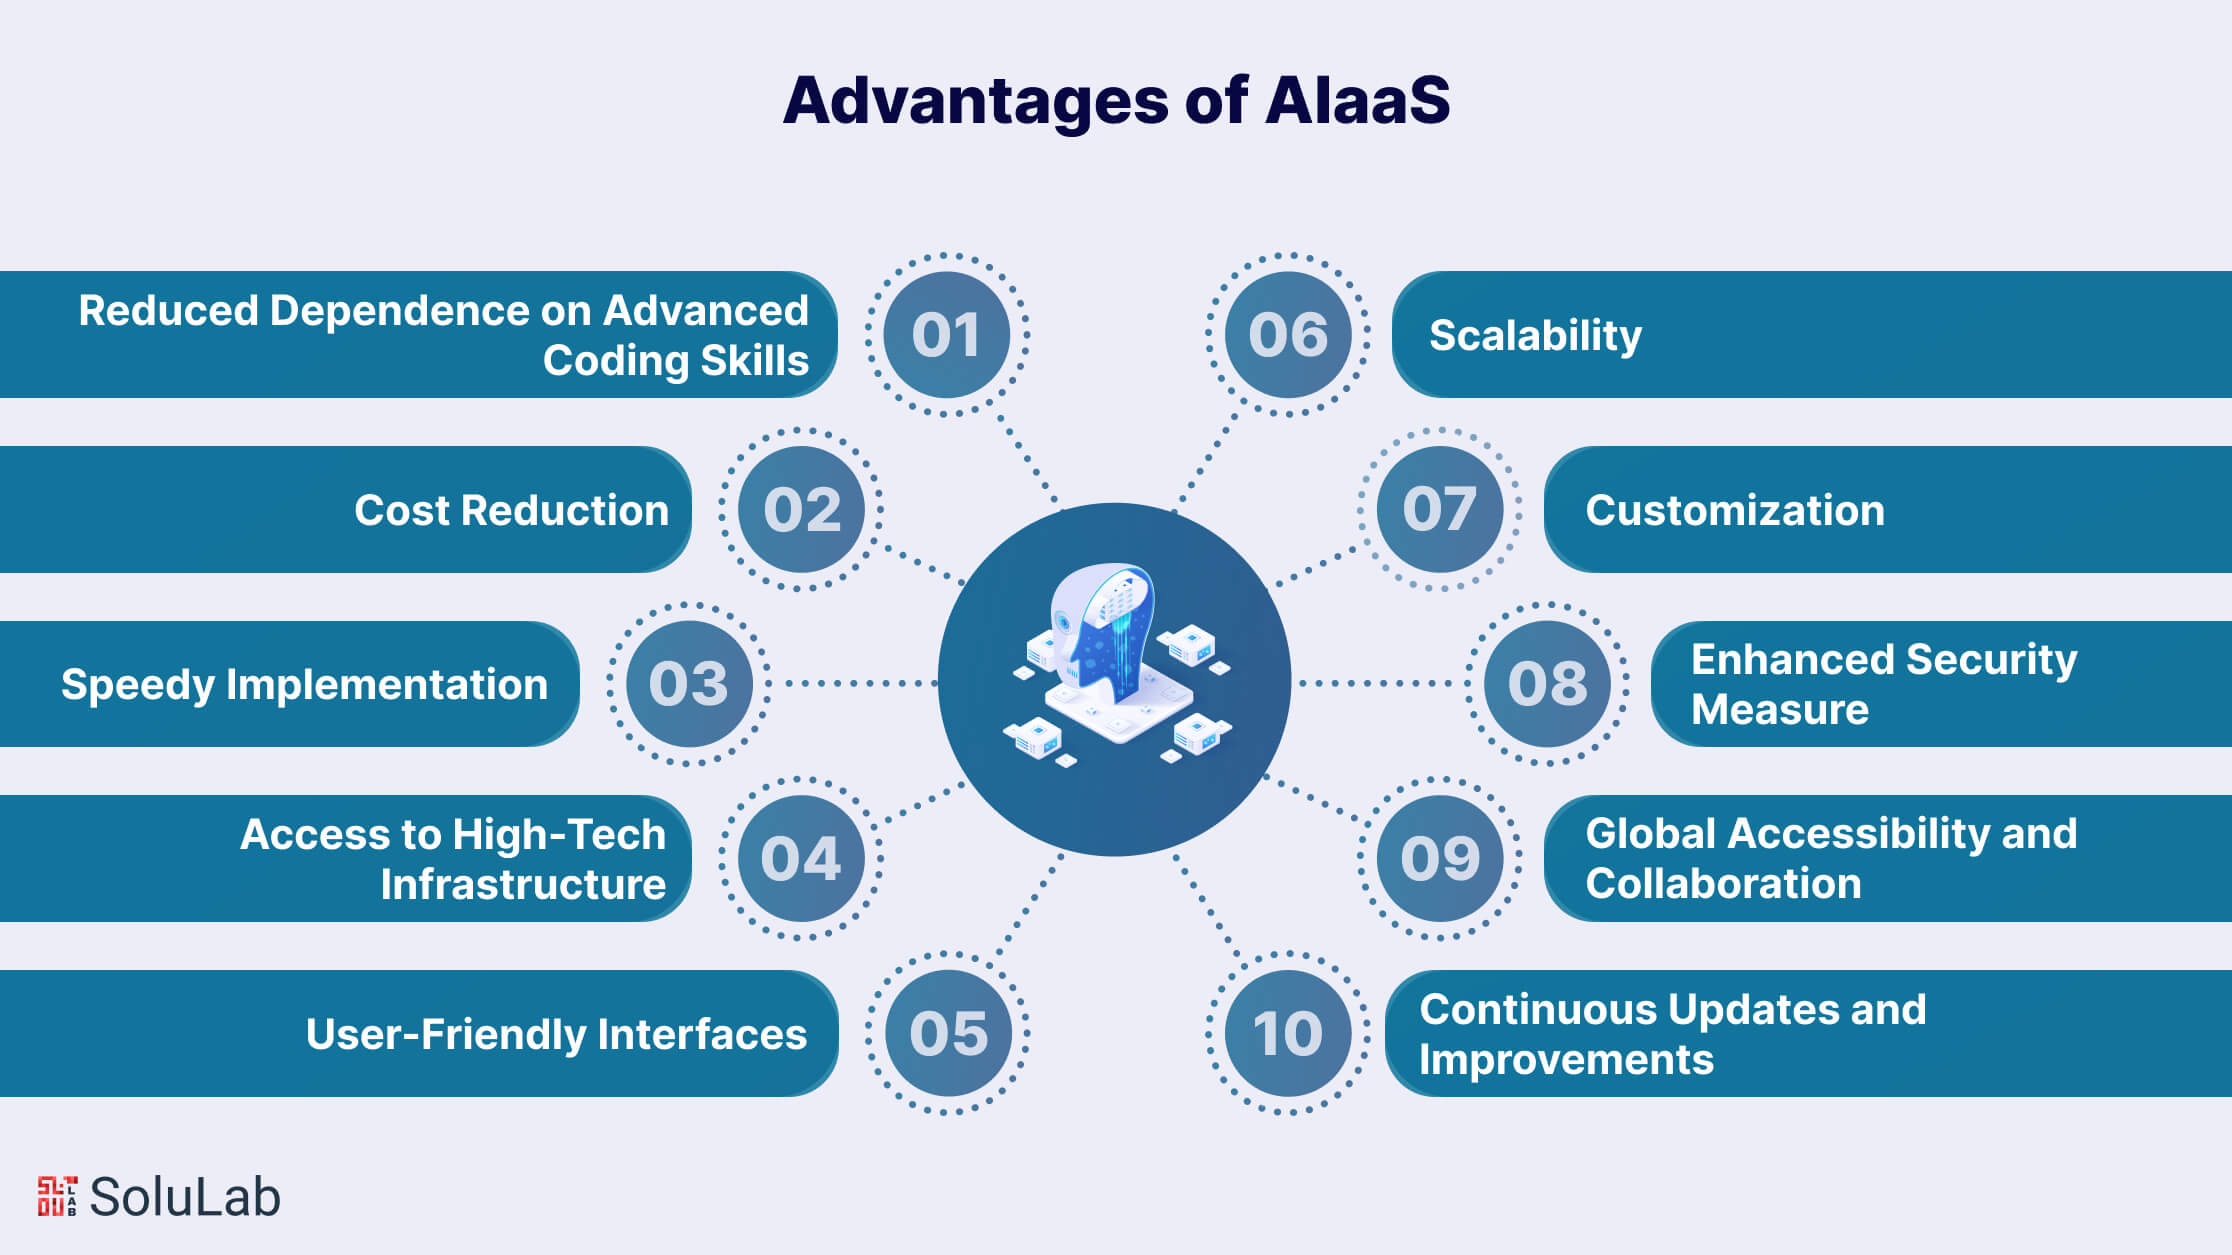 Advantages of AIaaS